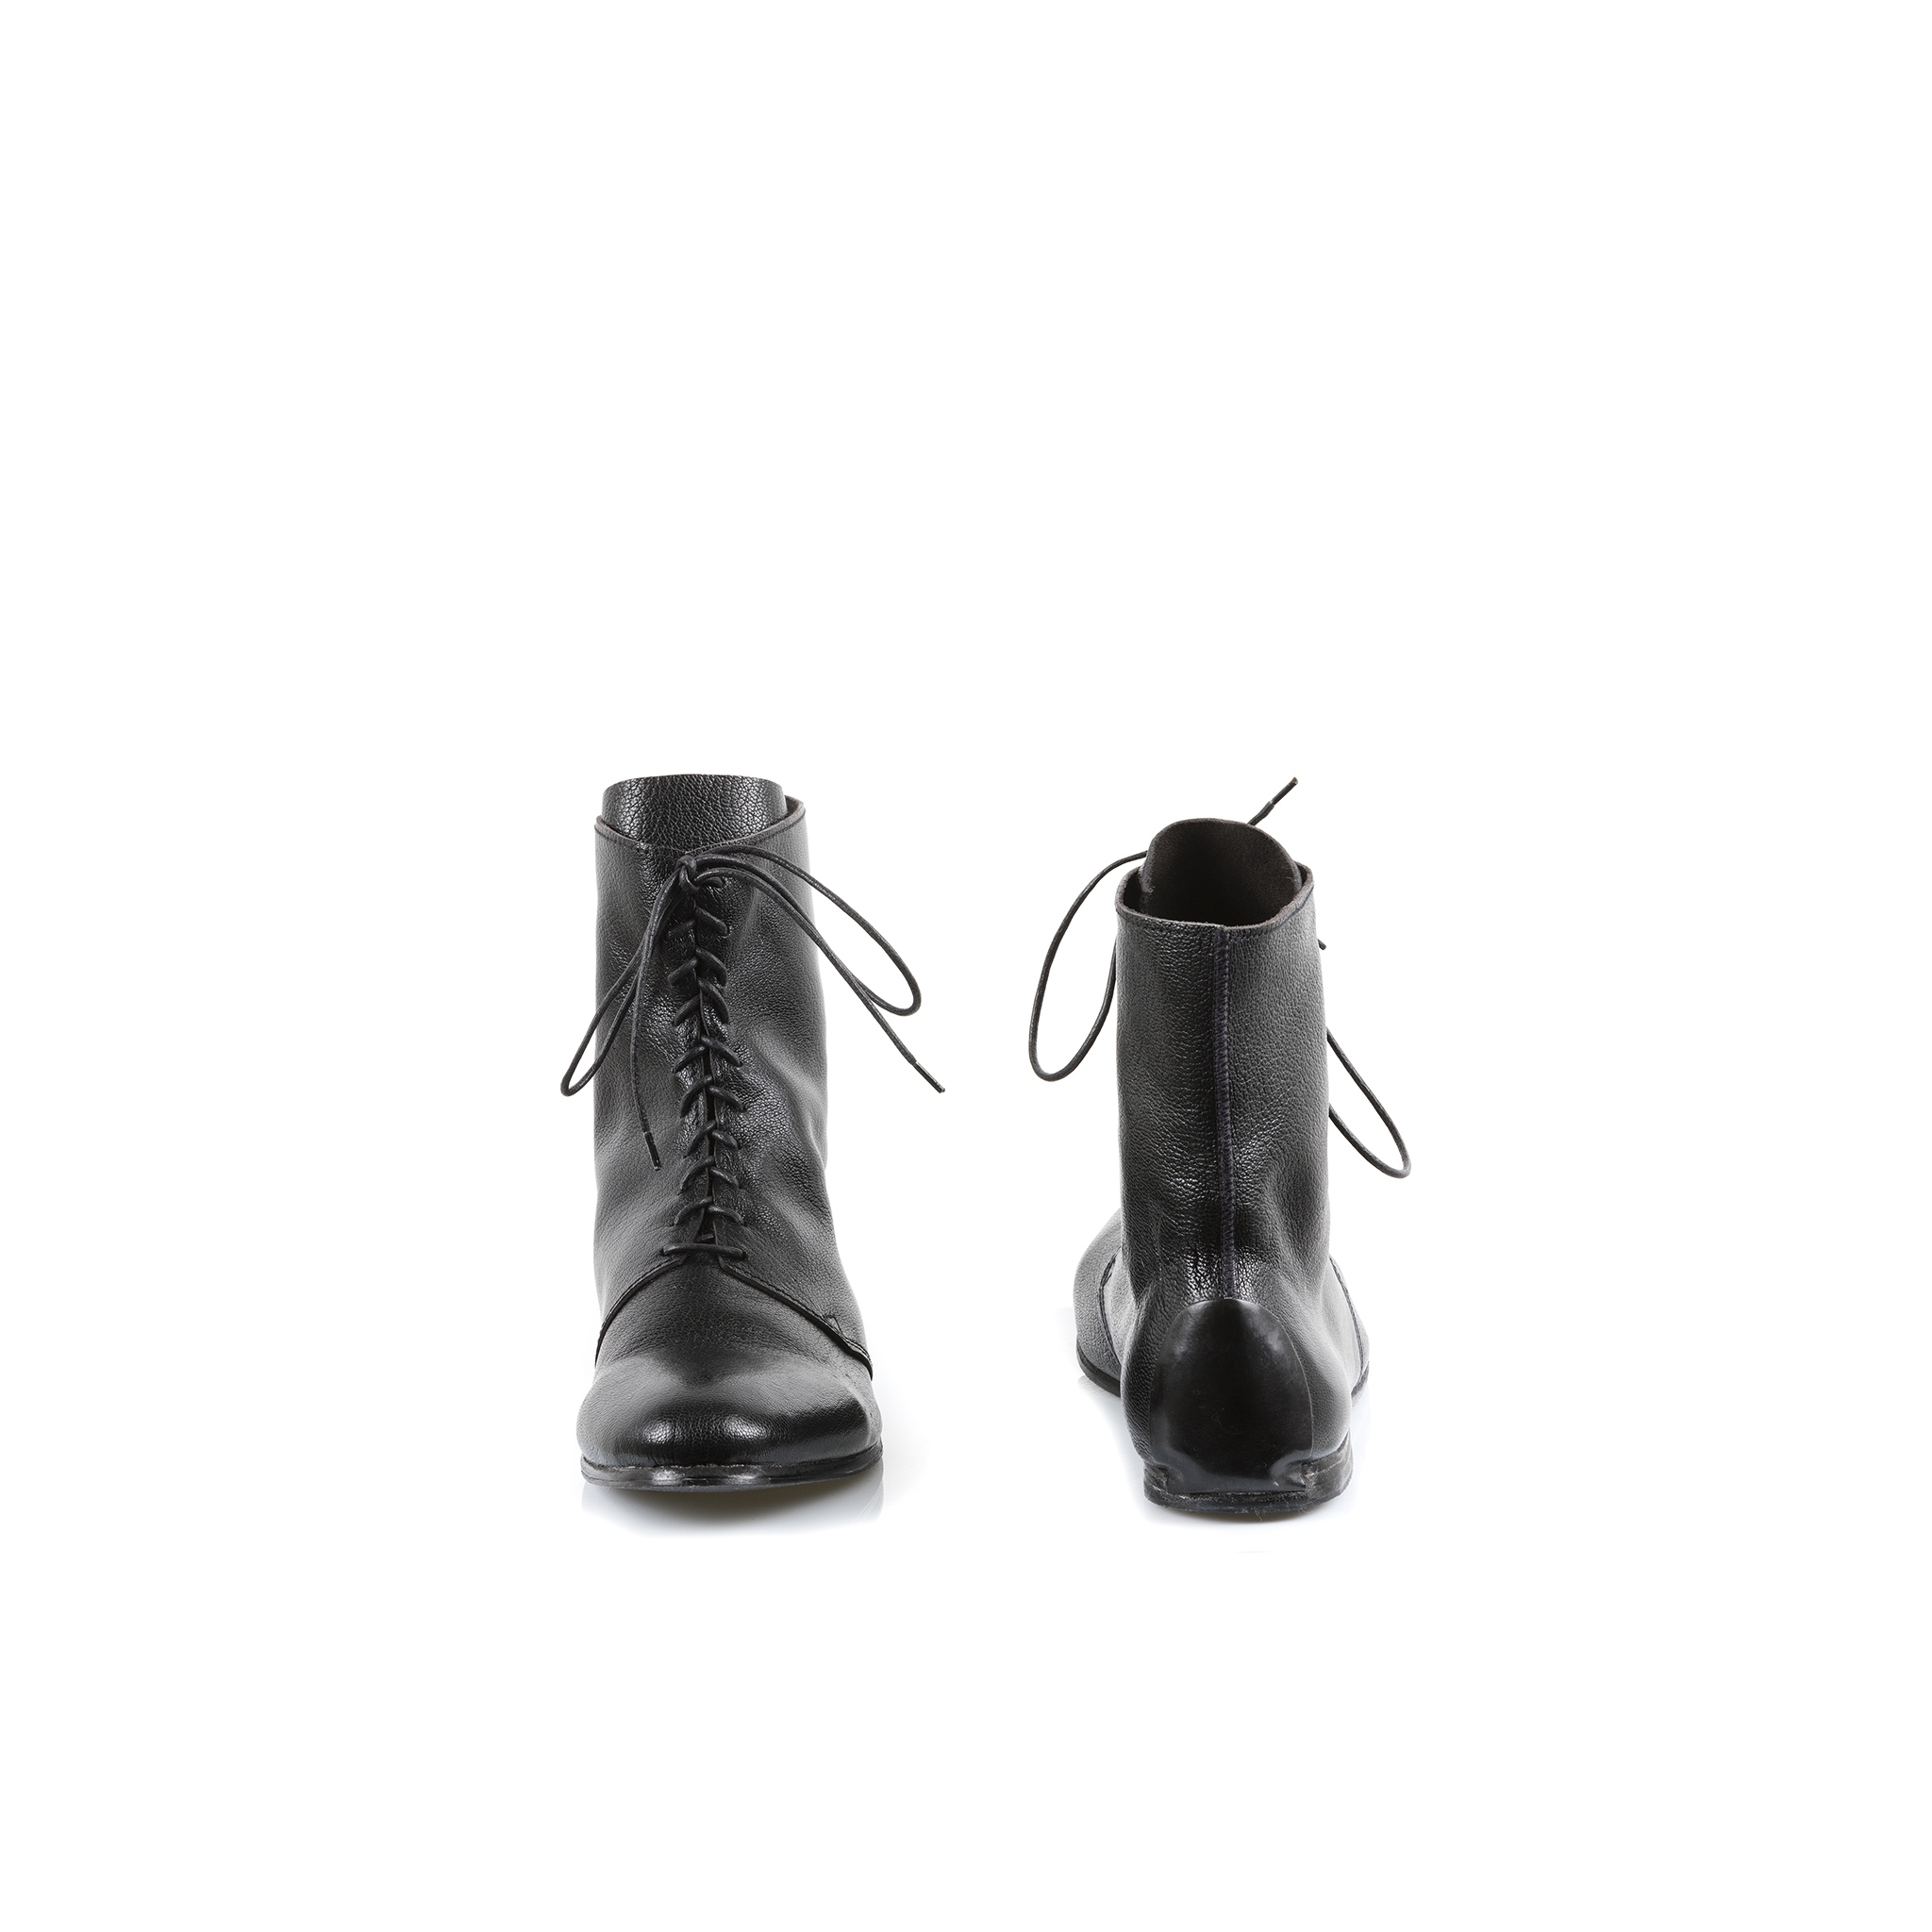 Titi Boots - Glossy leather - Black color